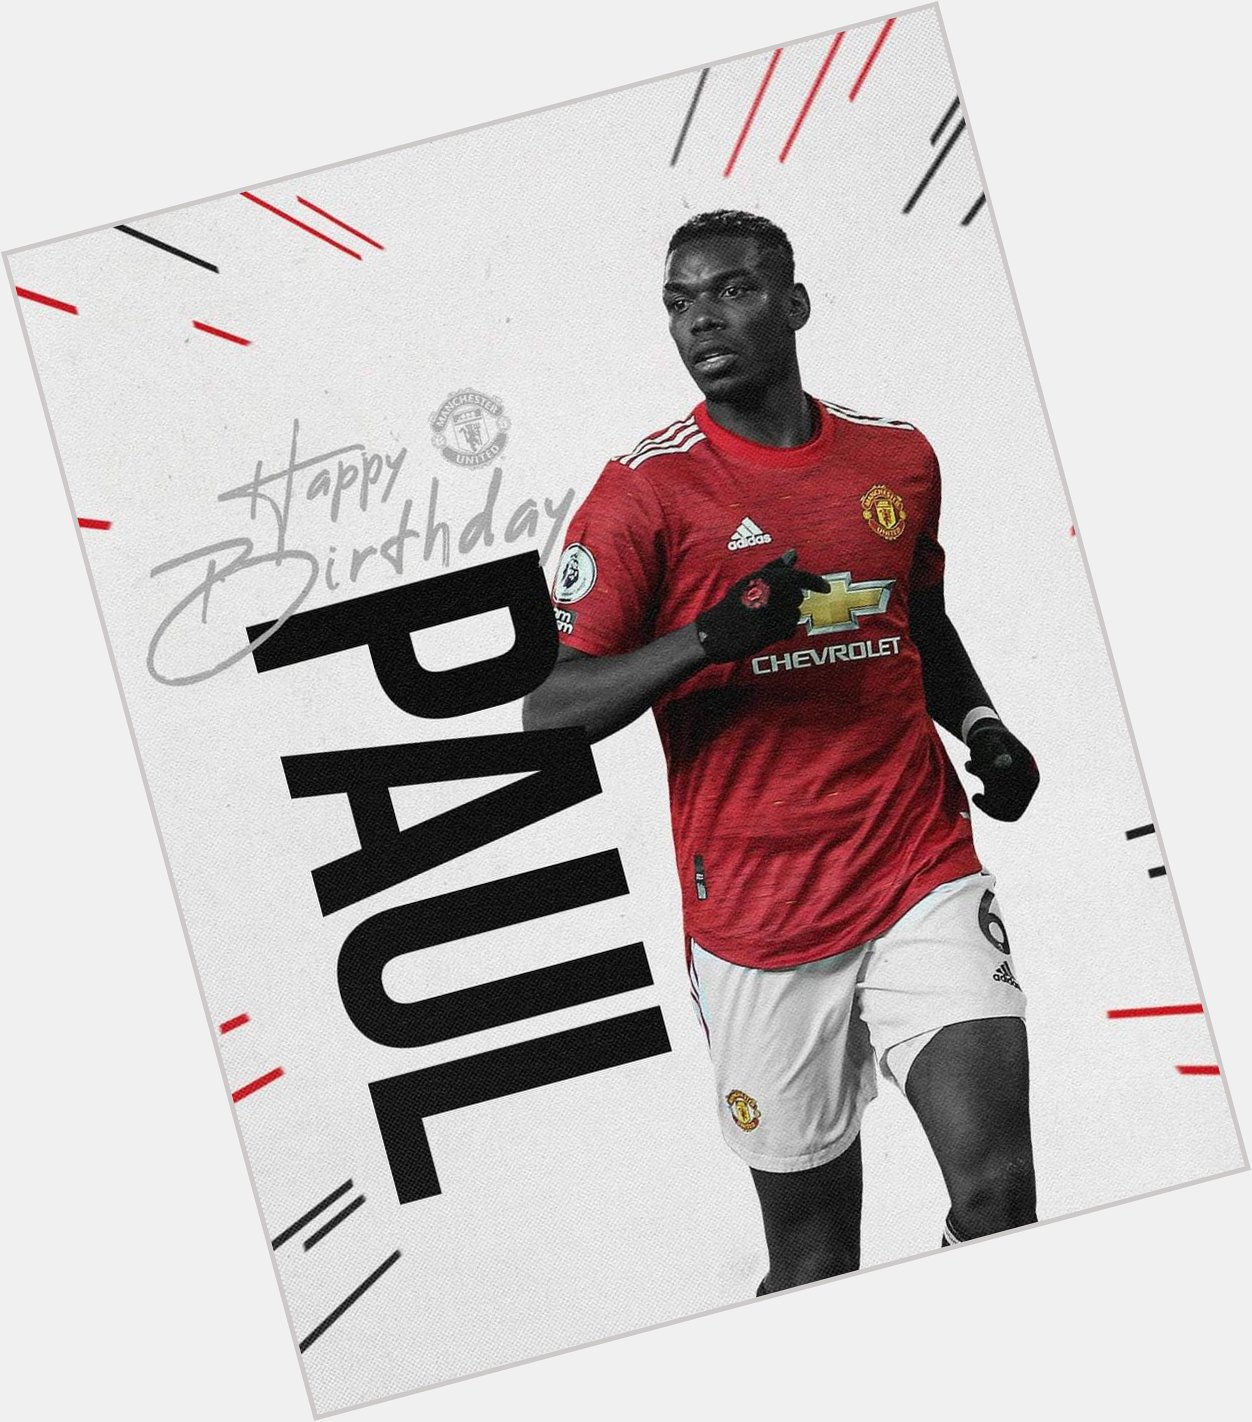 Happy Birthday Paul Pogba have a fantastic day  Hope to see you back fit on the pitch soon for  